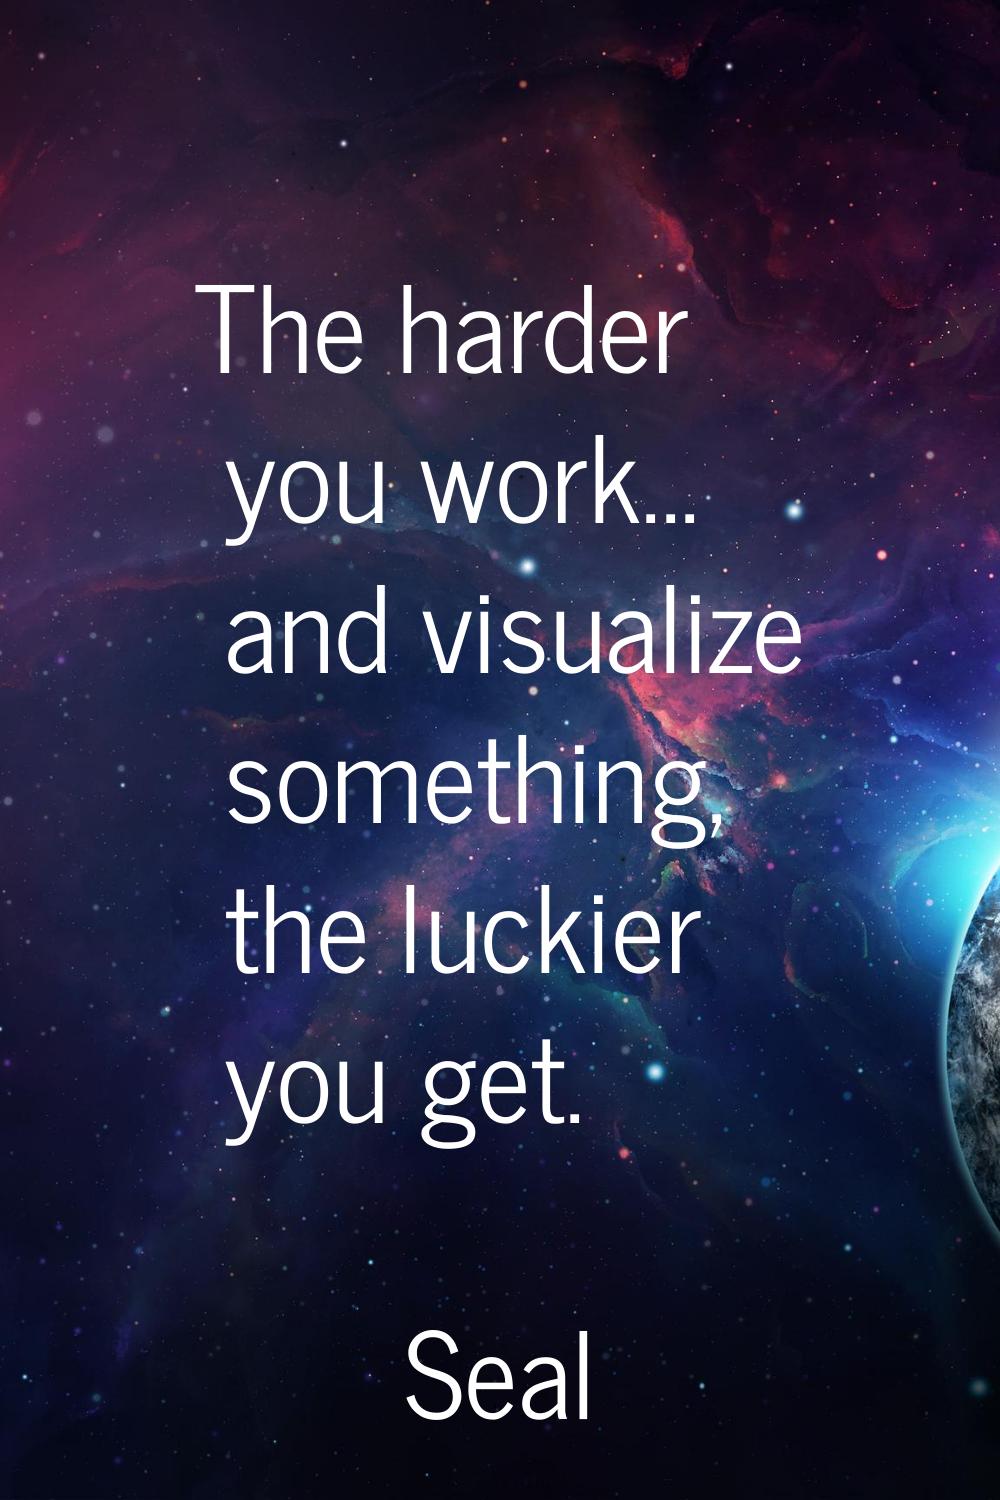 The harder you work... and visualize something, the luckier you get.